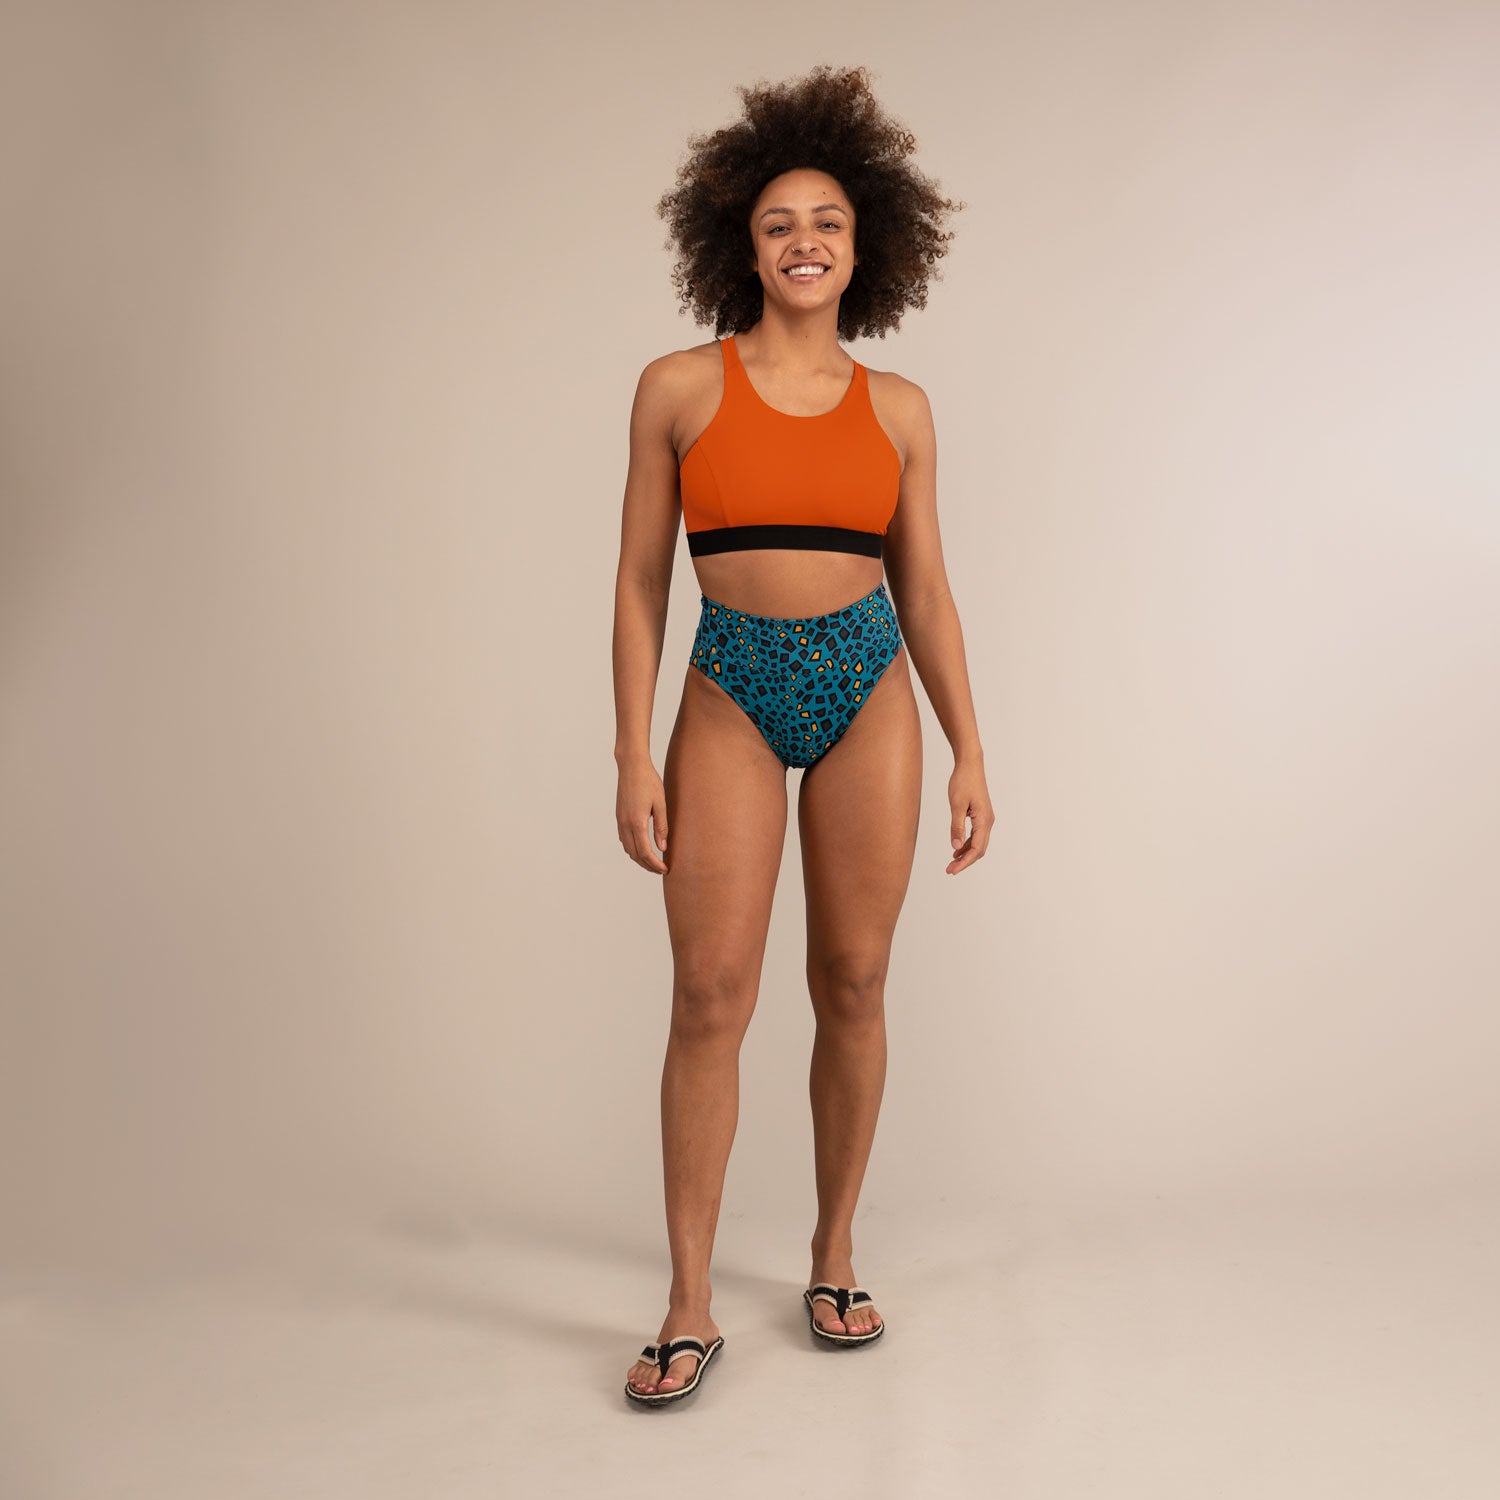 TIDE MINIMAL REPTILE | High Cut Recycled Bikini Bottoms | 3RD ROCK Clothing -  Kendal is 5ft 7 with a 28" waist, 38" hips and wears a size 12 F